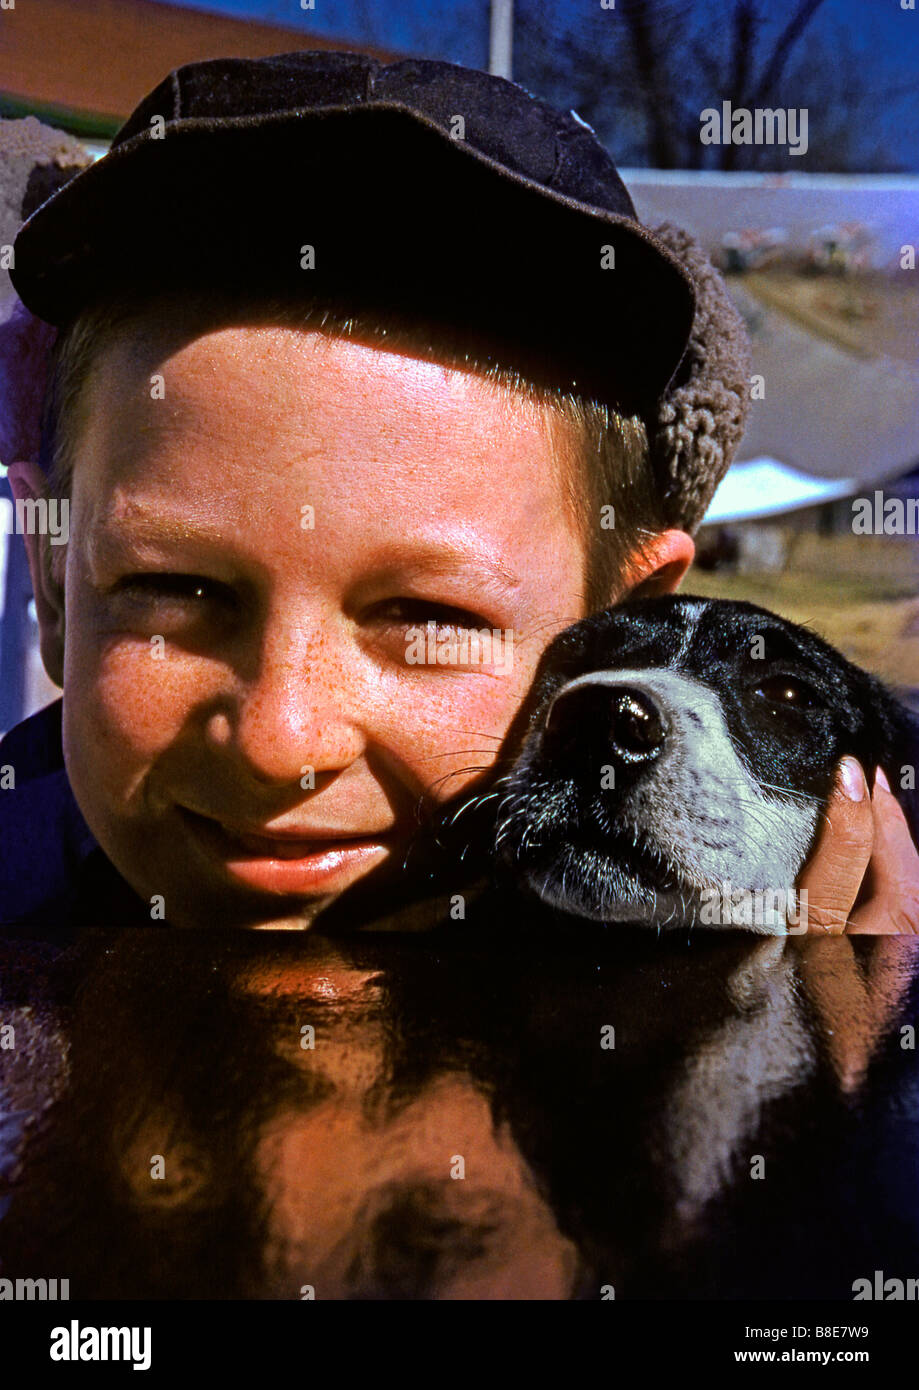 Boy in a winter hat and his pet dog reflected in shiny paintwork of a car, USA, c. 1955 Stock Photo